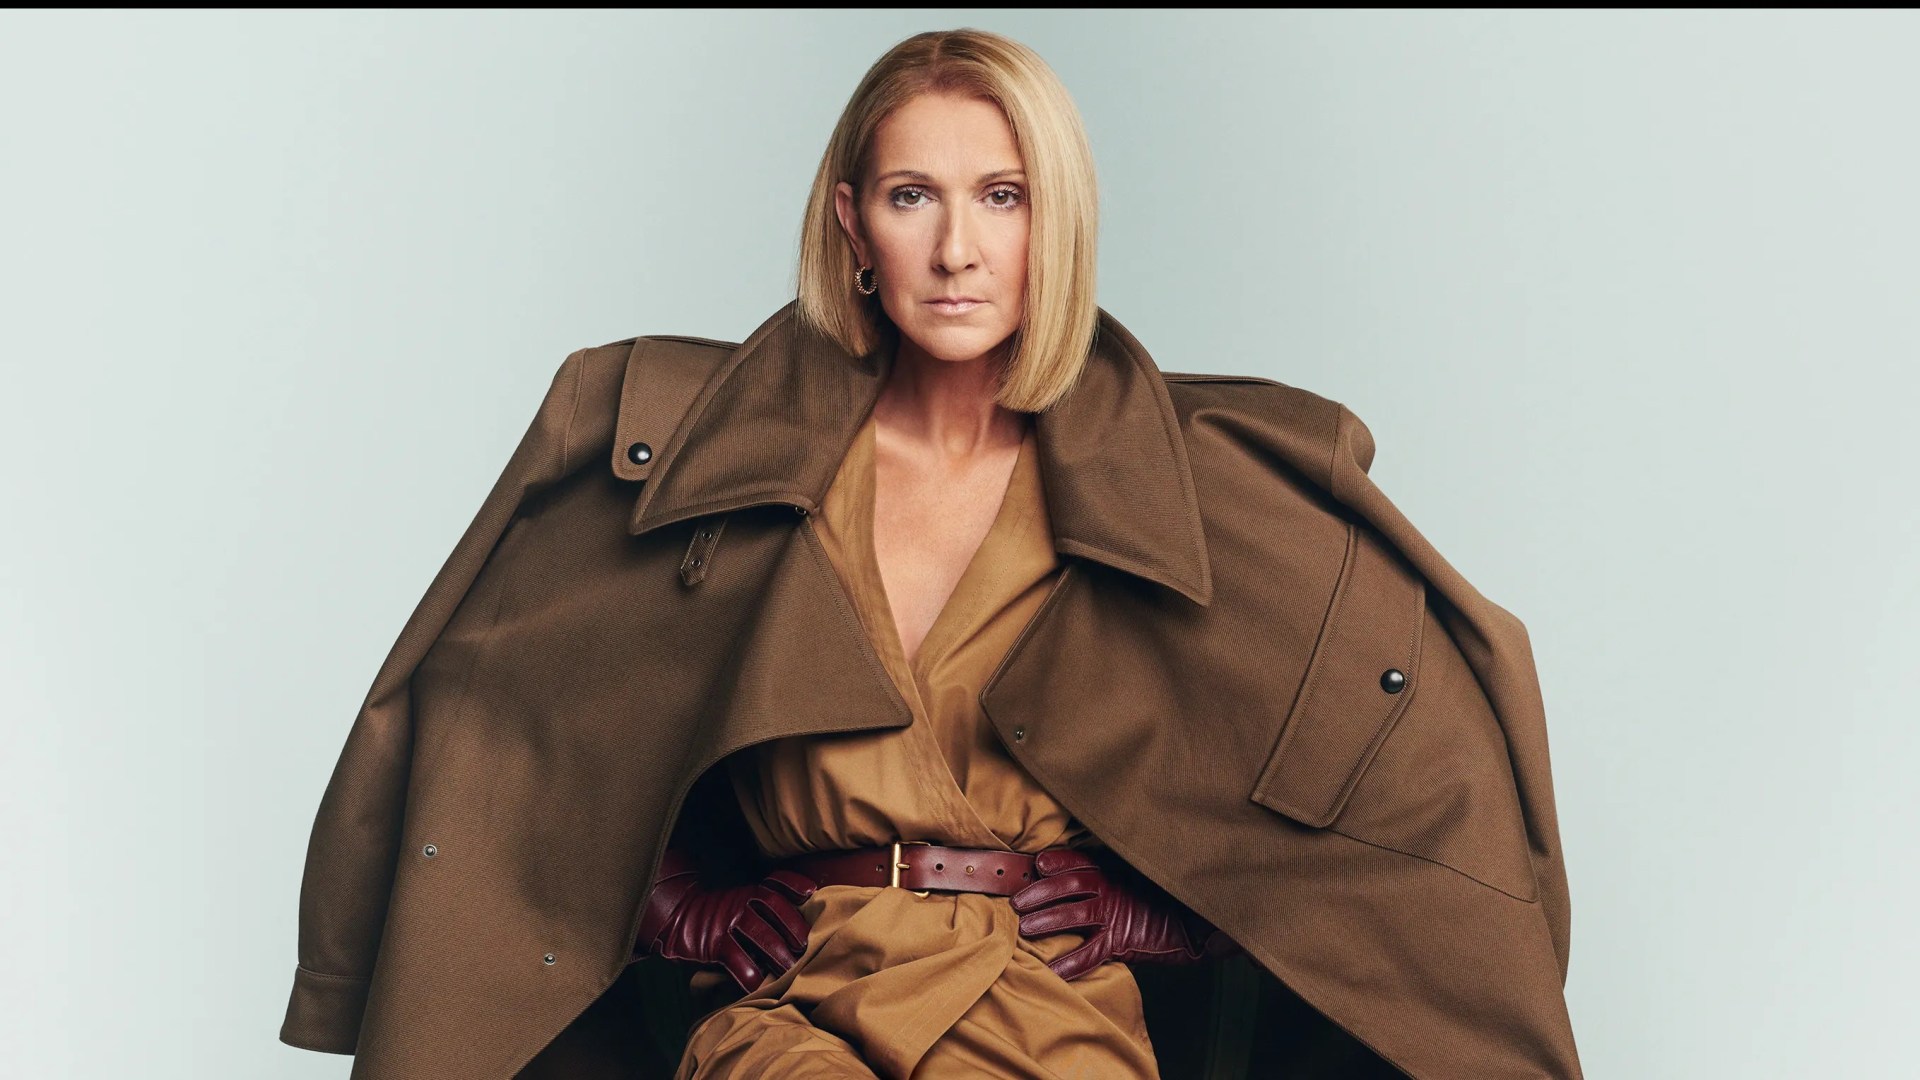 Celine Dion’s Inspiring Health Journey: Overcoming Incurable Stiff Person Syndrome After Two Years